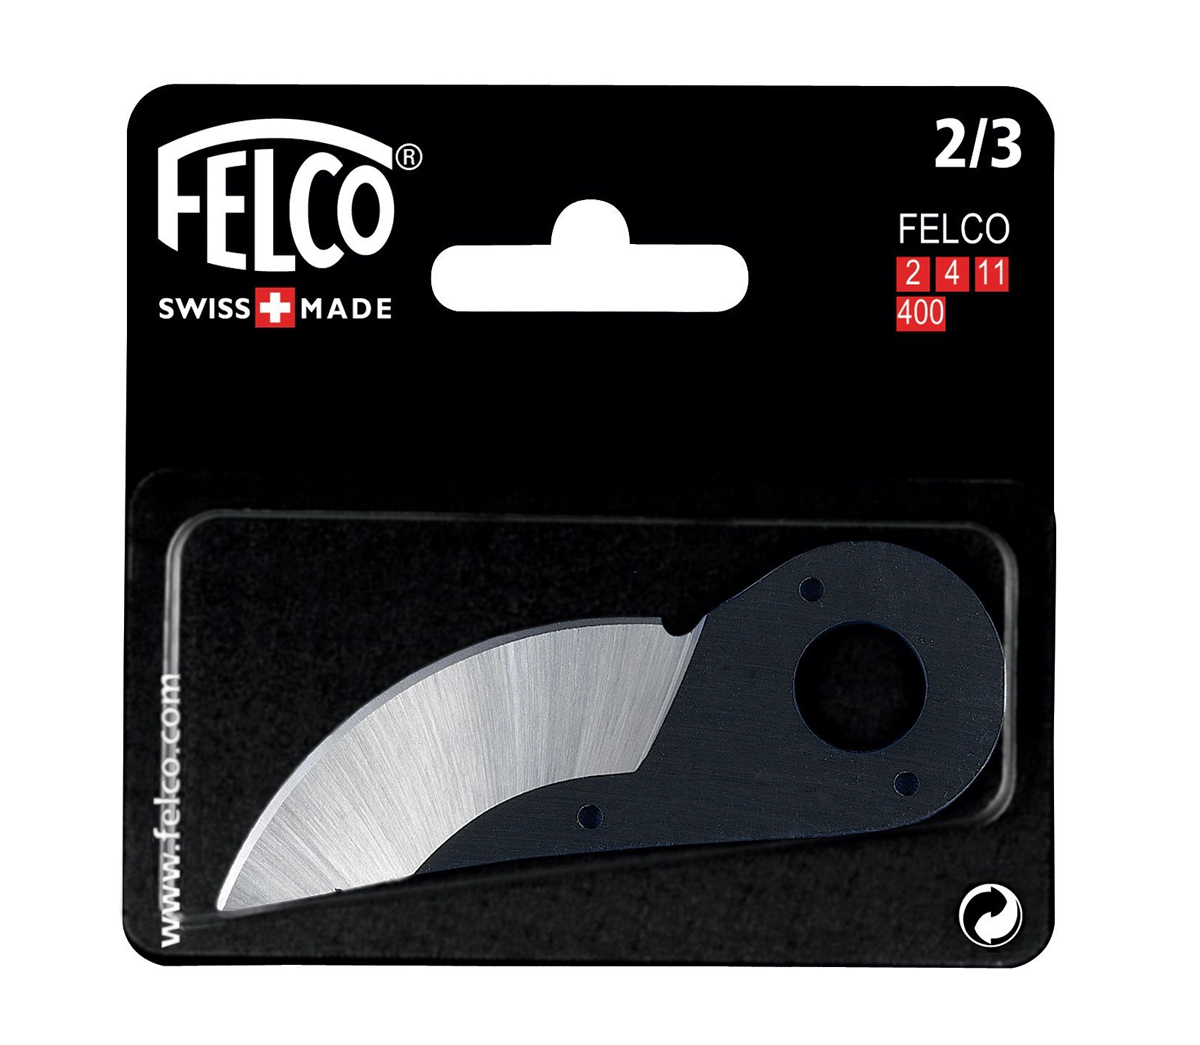 2 - 3 Cutting Blade for F 2 4 11 Felco - Hand Tools